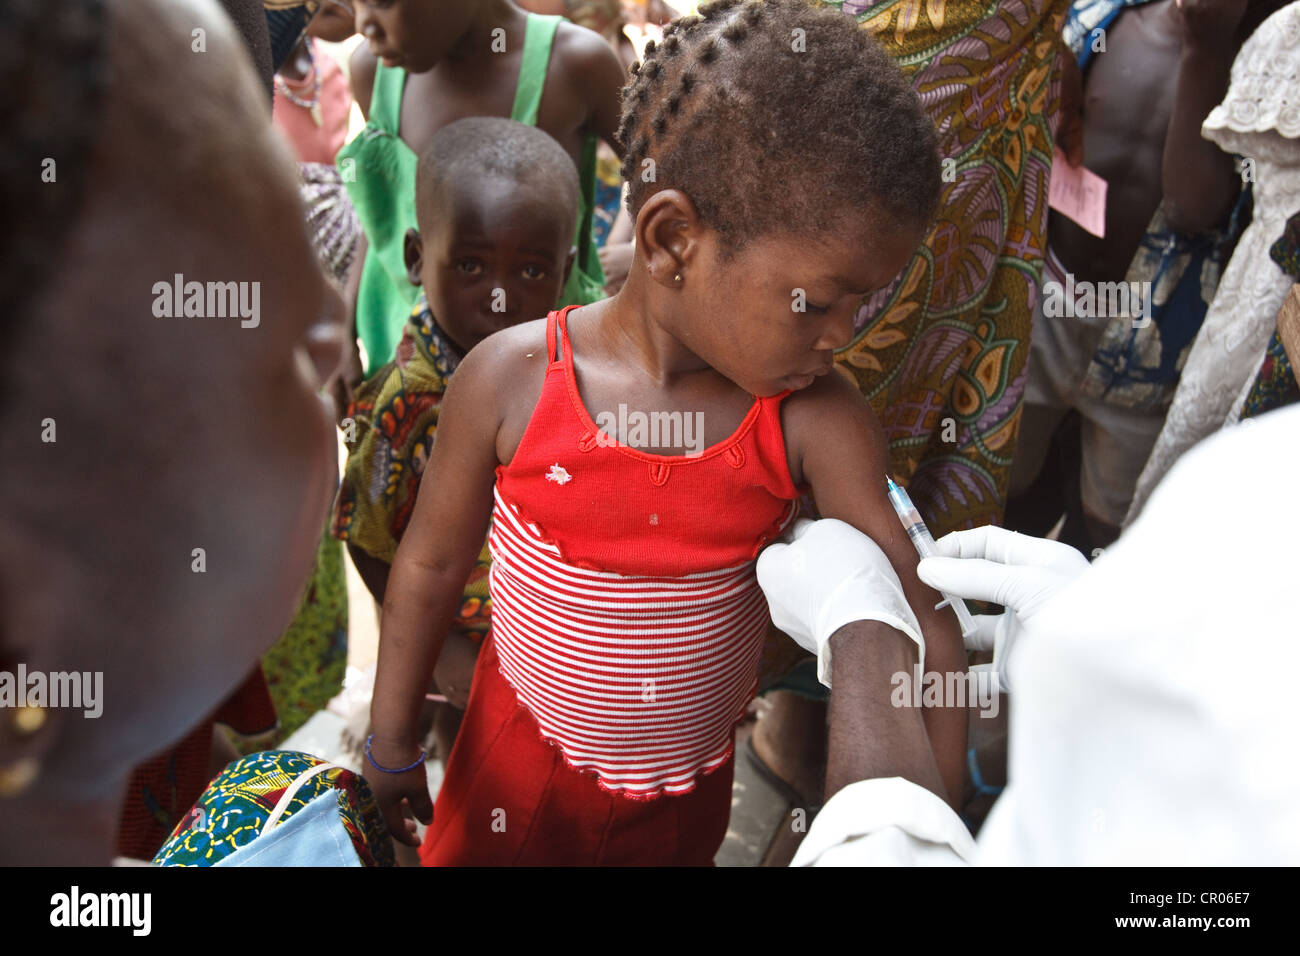 A girl gets vaccinated during a national measles vaccination campaign at the Panzarani health center in the village of Panzarani Stock Photo